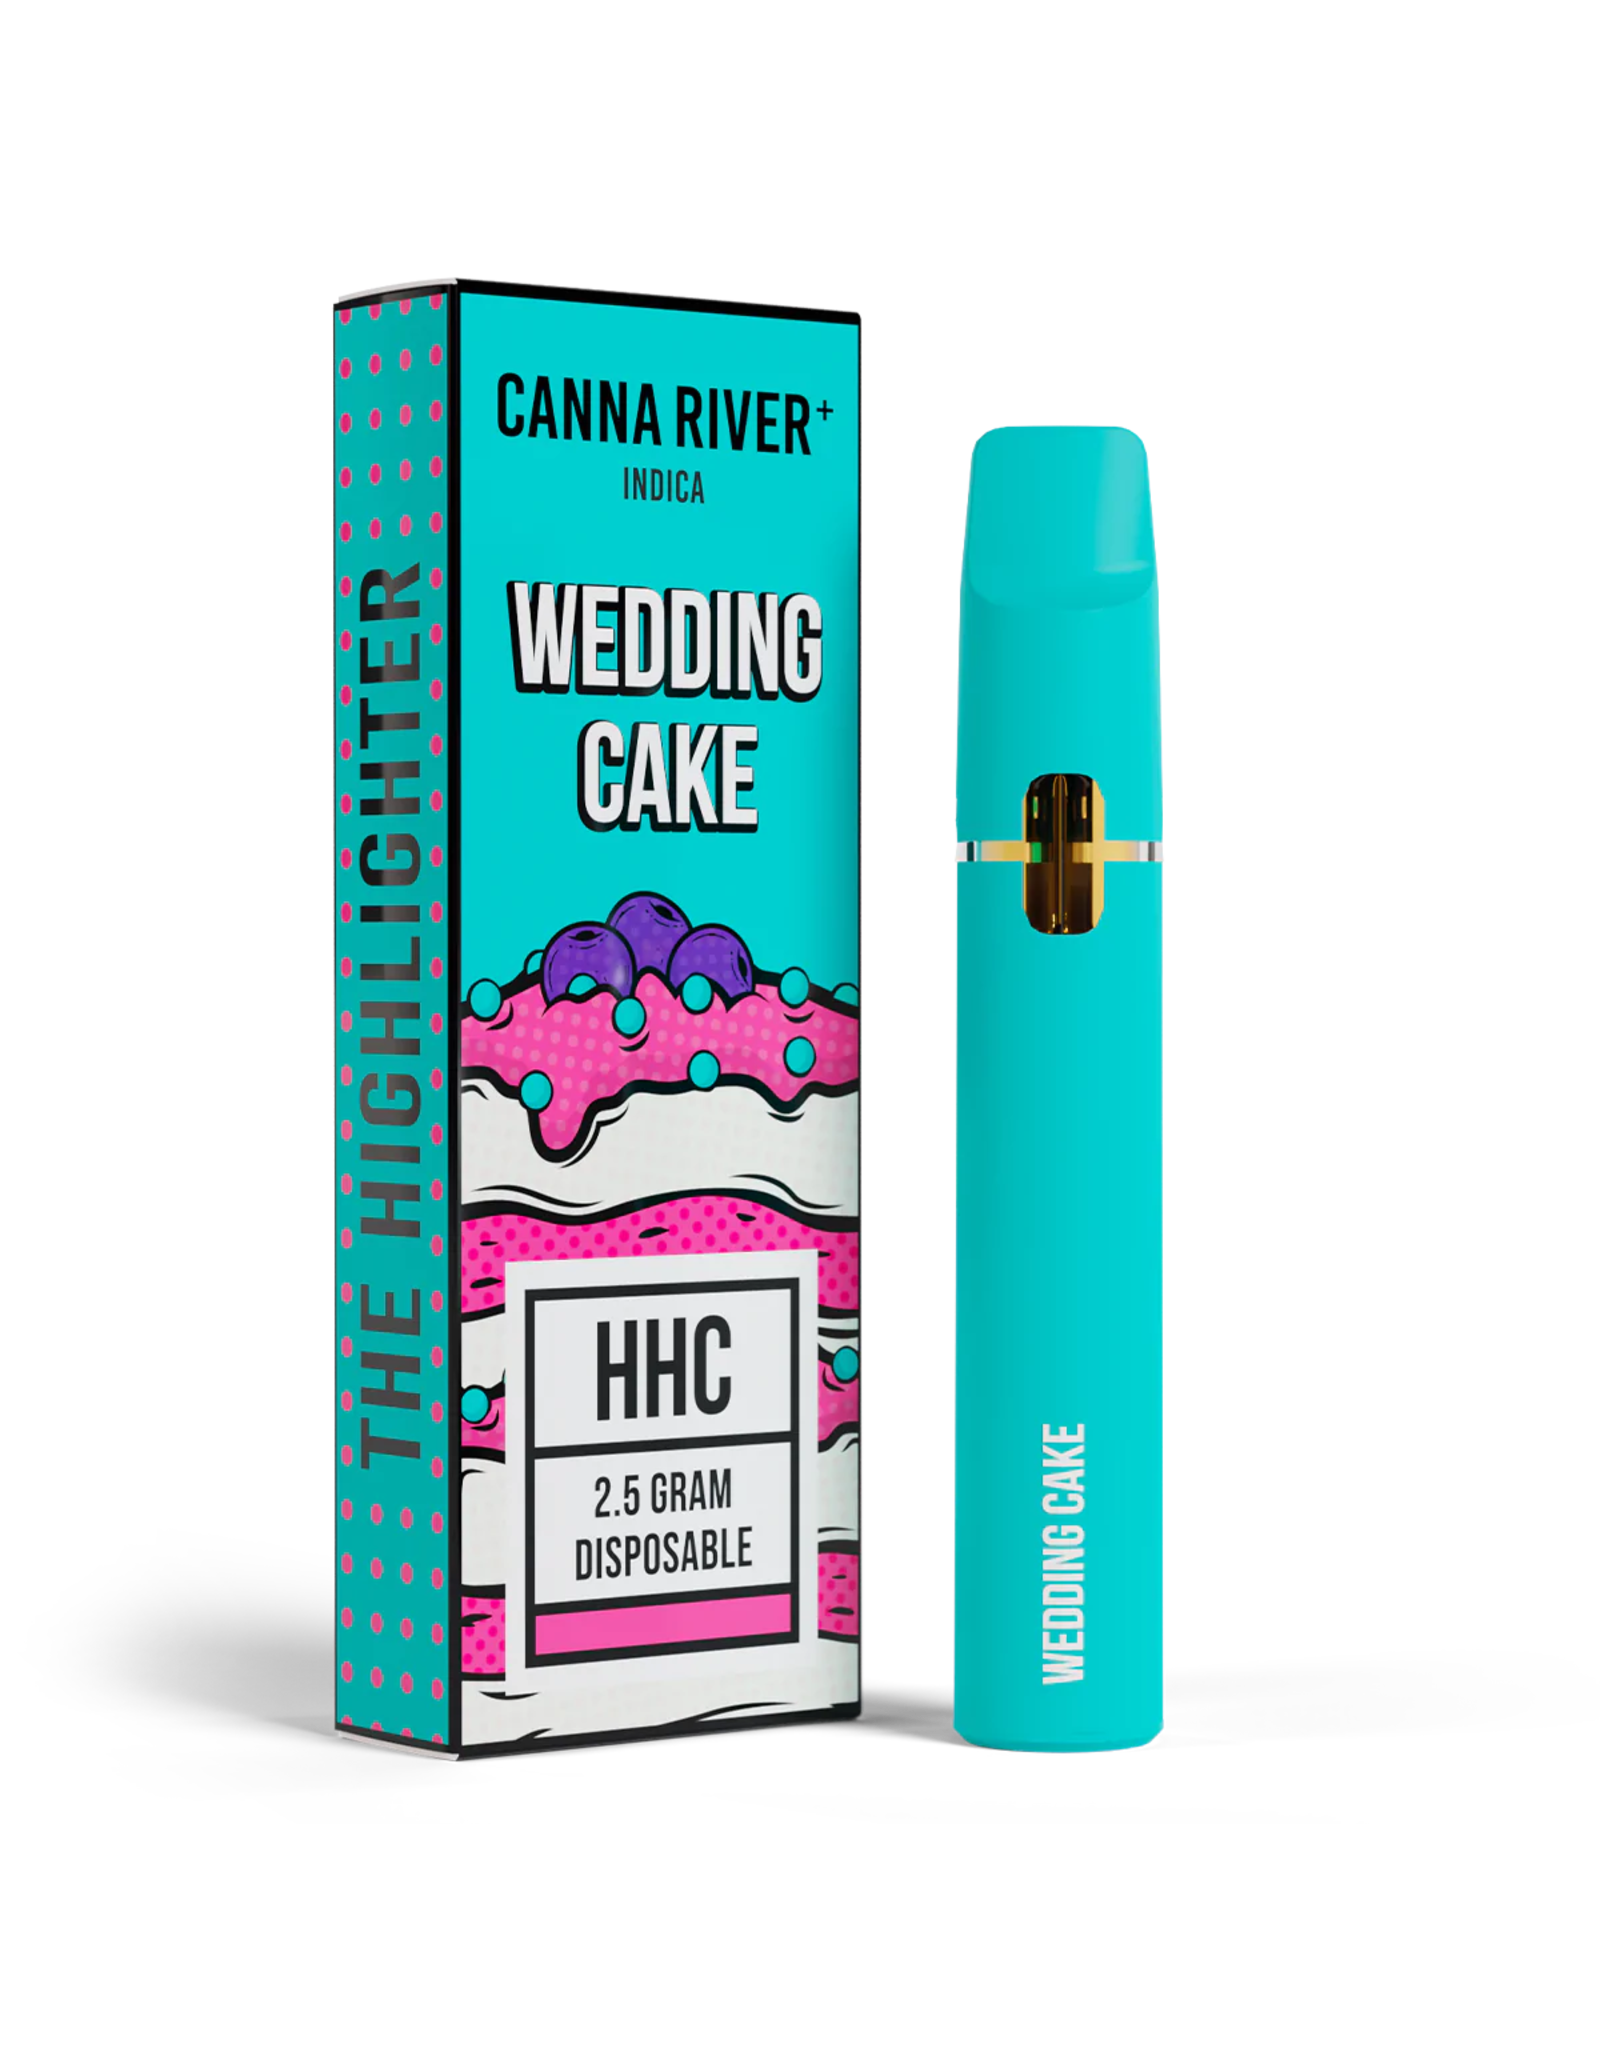 Canna River Canna River HHC Wedding Cake Indica Disposable Rechargeable 2.5gr Cartridge